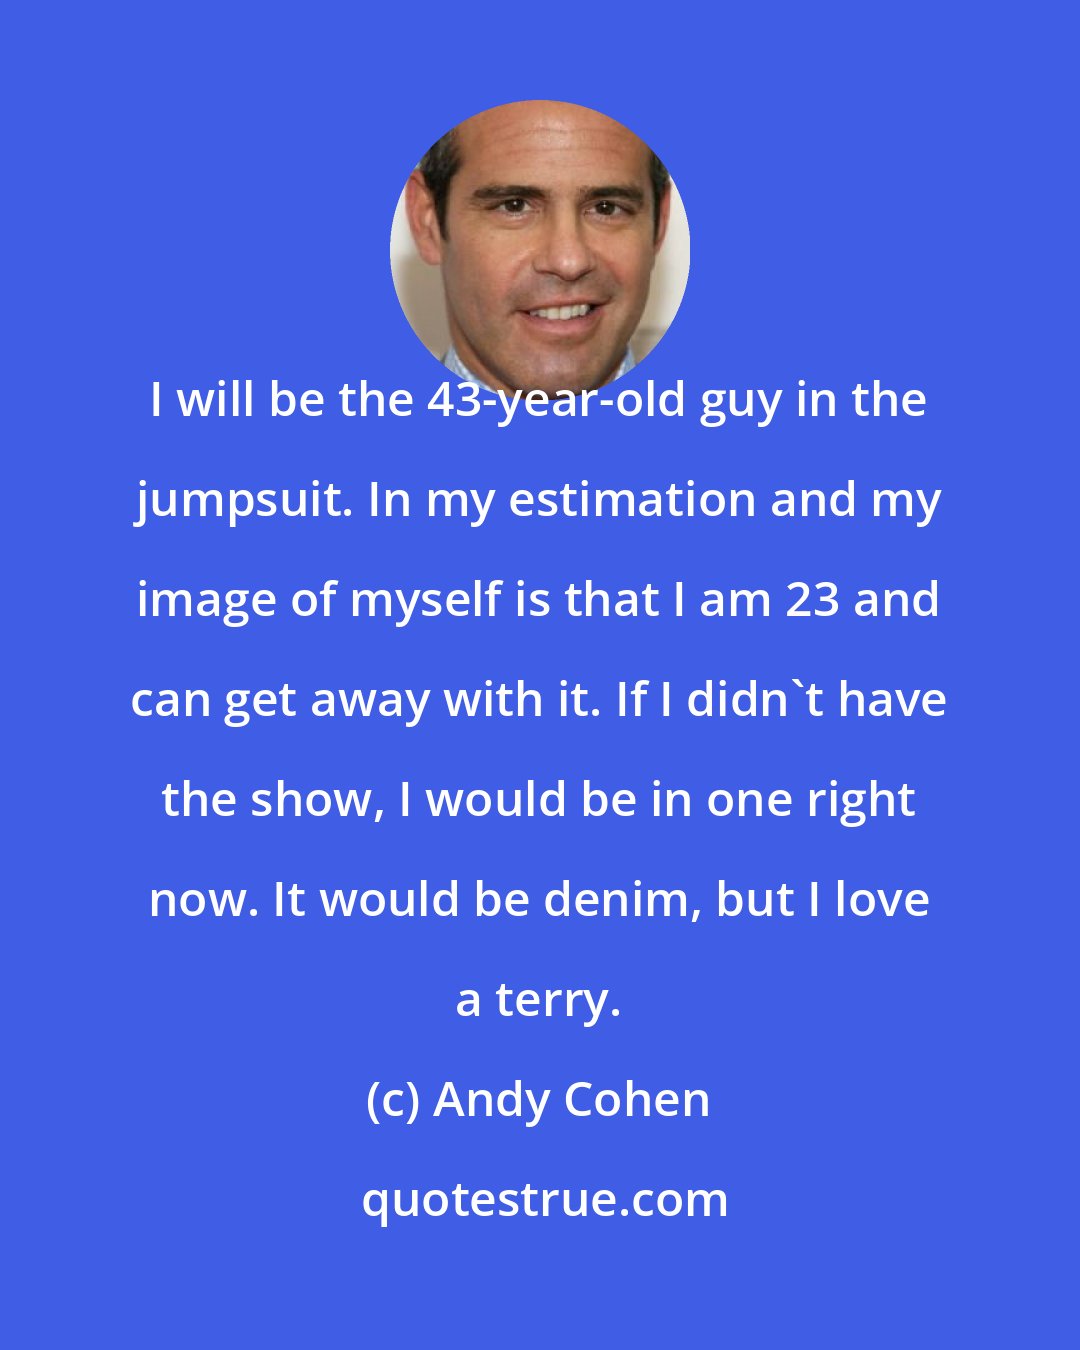 Andy Cohen: I will be the 43-year-old guy in the jumpsuit. In my estimation and my image of myself is that I am 23 and can get away with it. If I didn't have the show, I would be in one right now. It would be denim, but I love a terry.